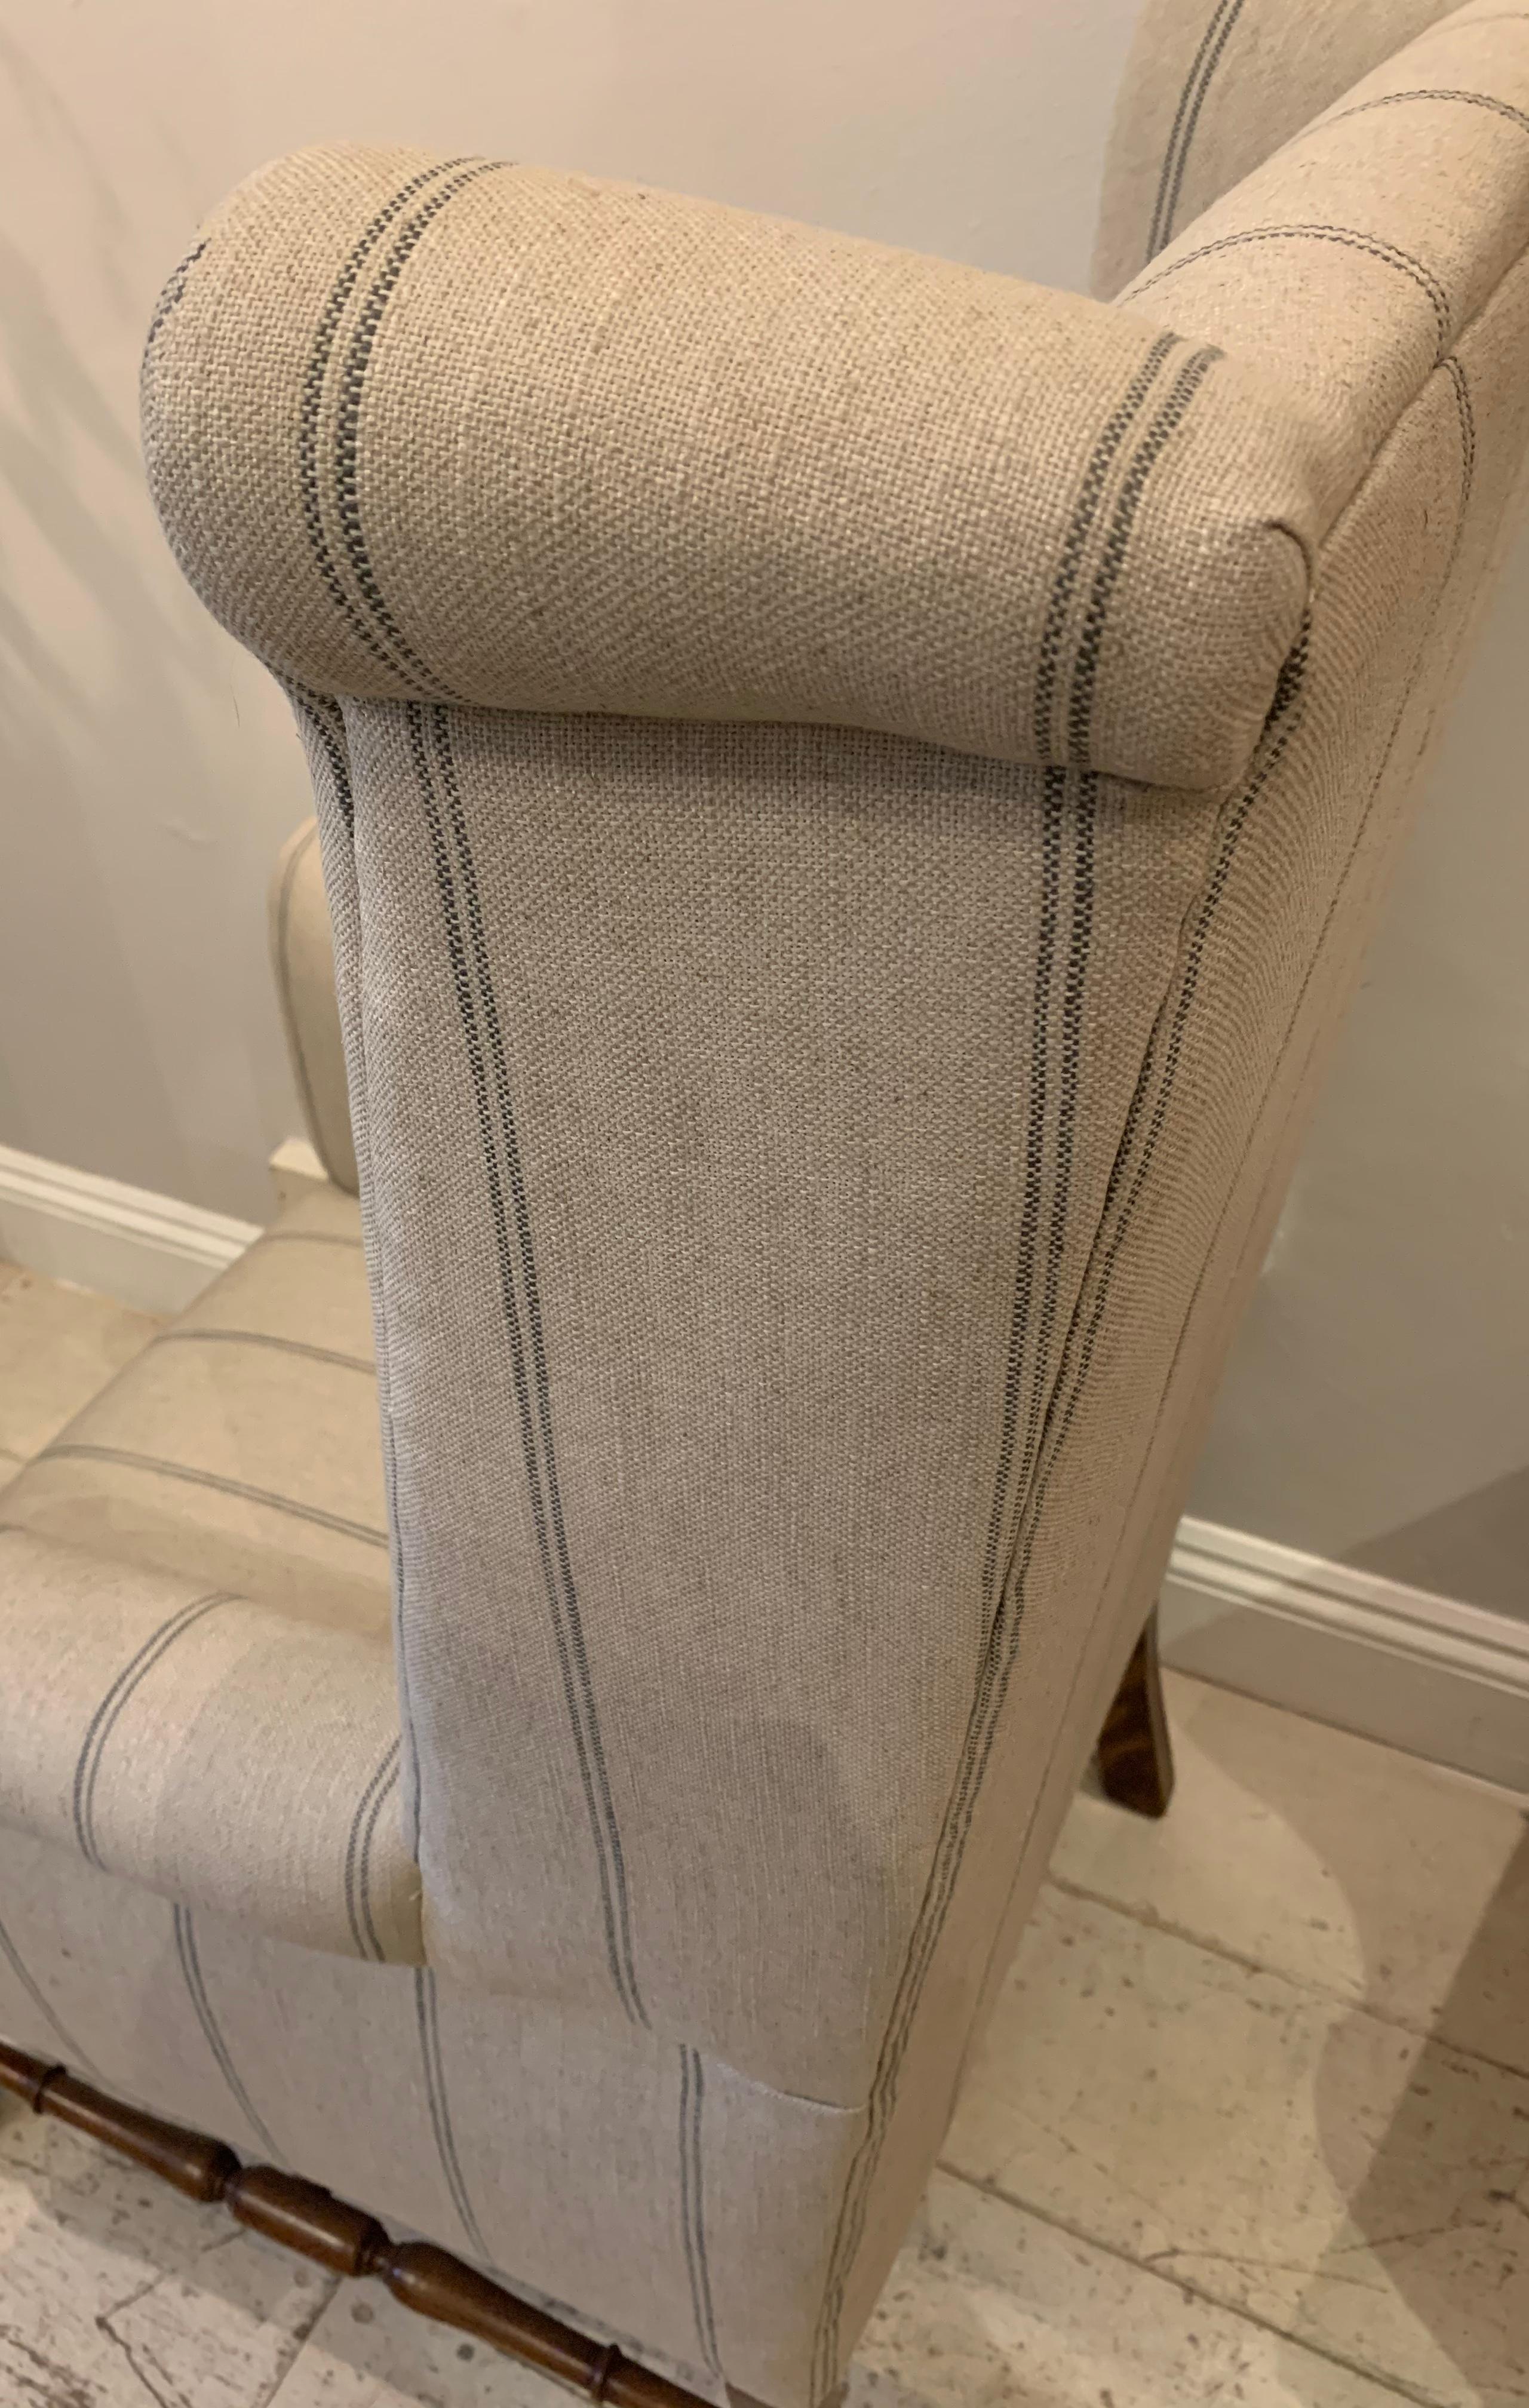 Late 19th Century Circa 1900 English Wingback Armchair with Walnut Legs in a Neutral Linen Fabric